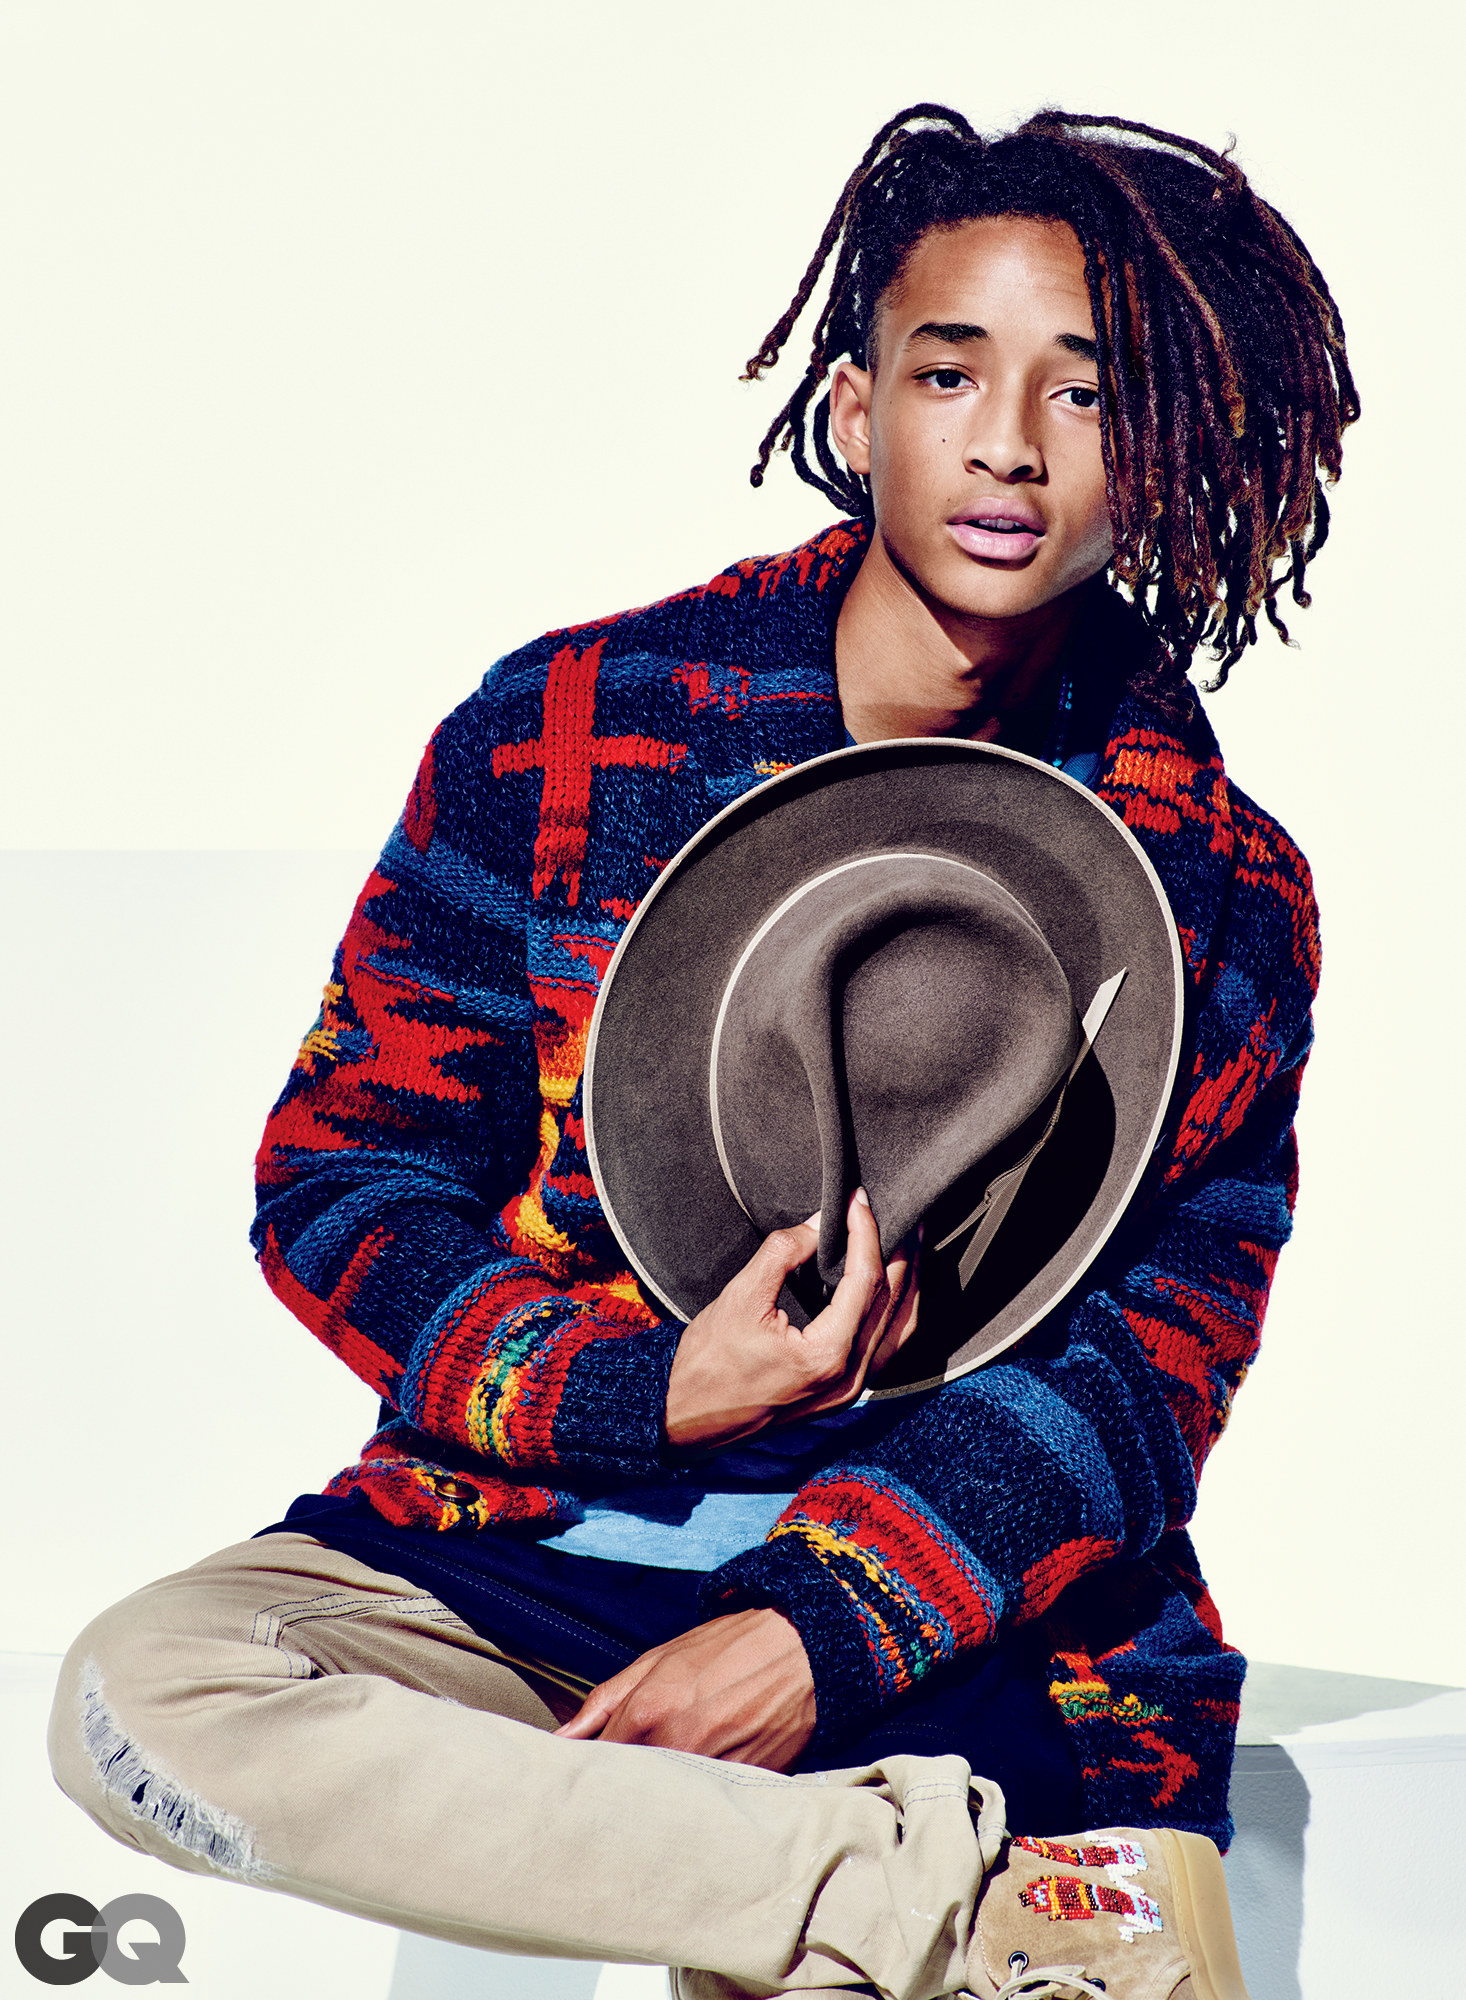 HQ Jaden Smith Wallpapers | File 876.38Kb